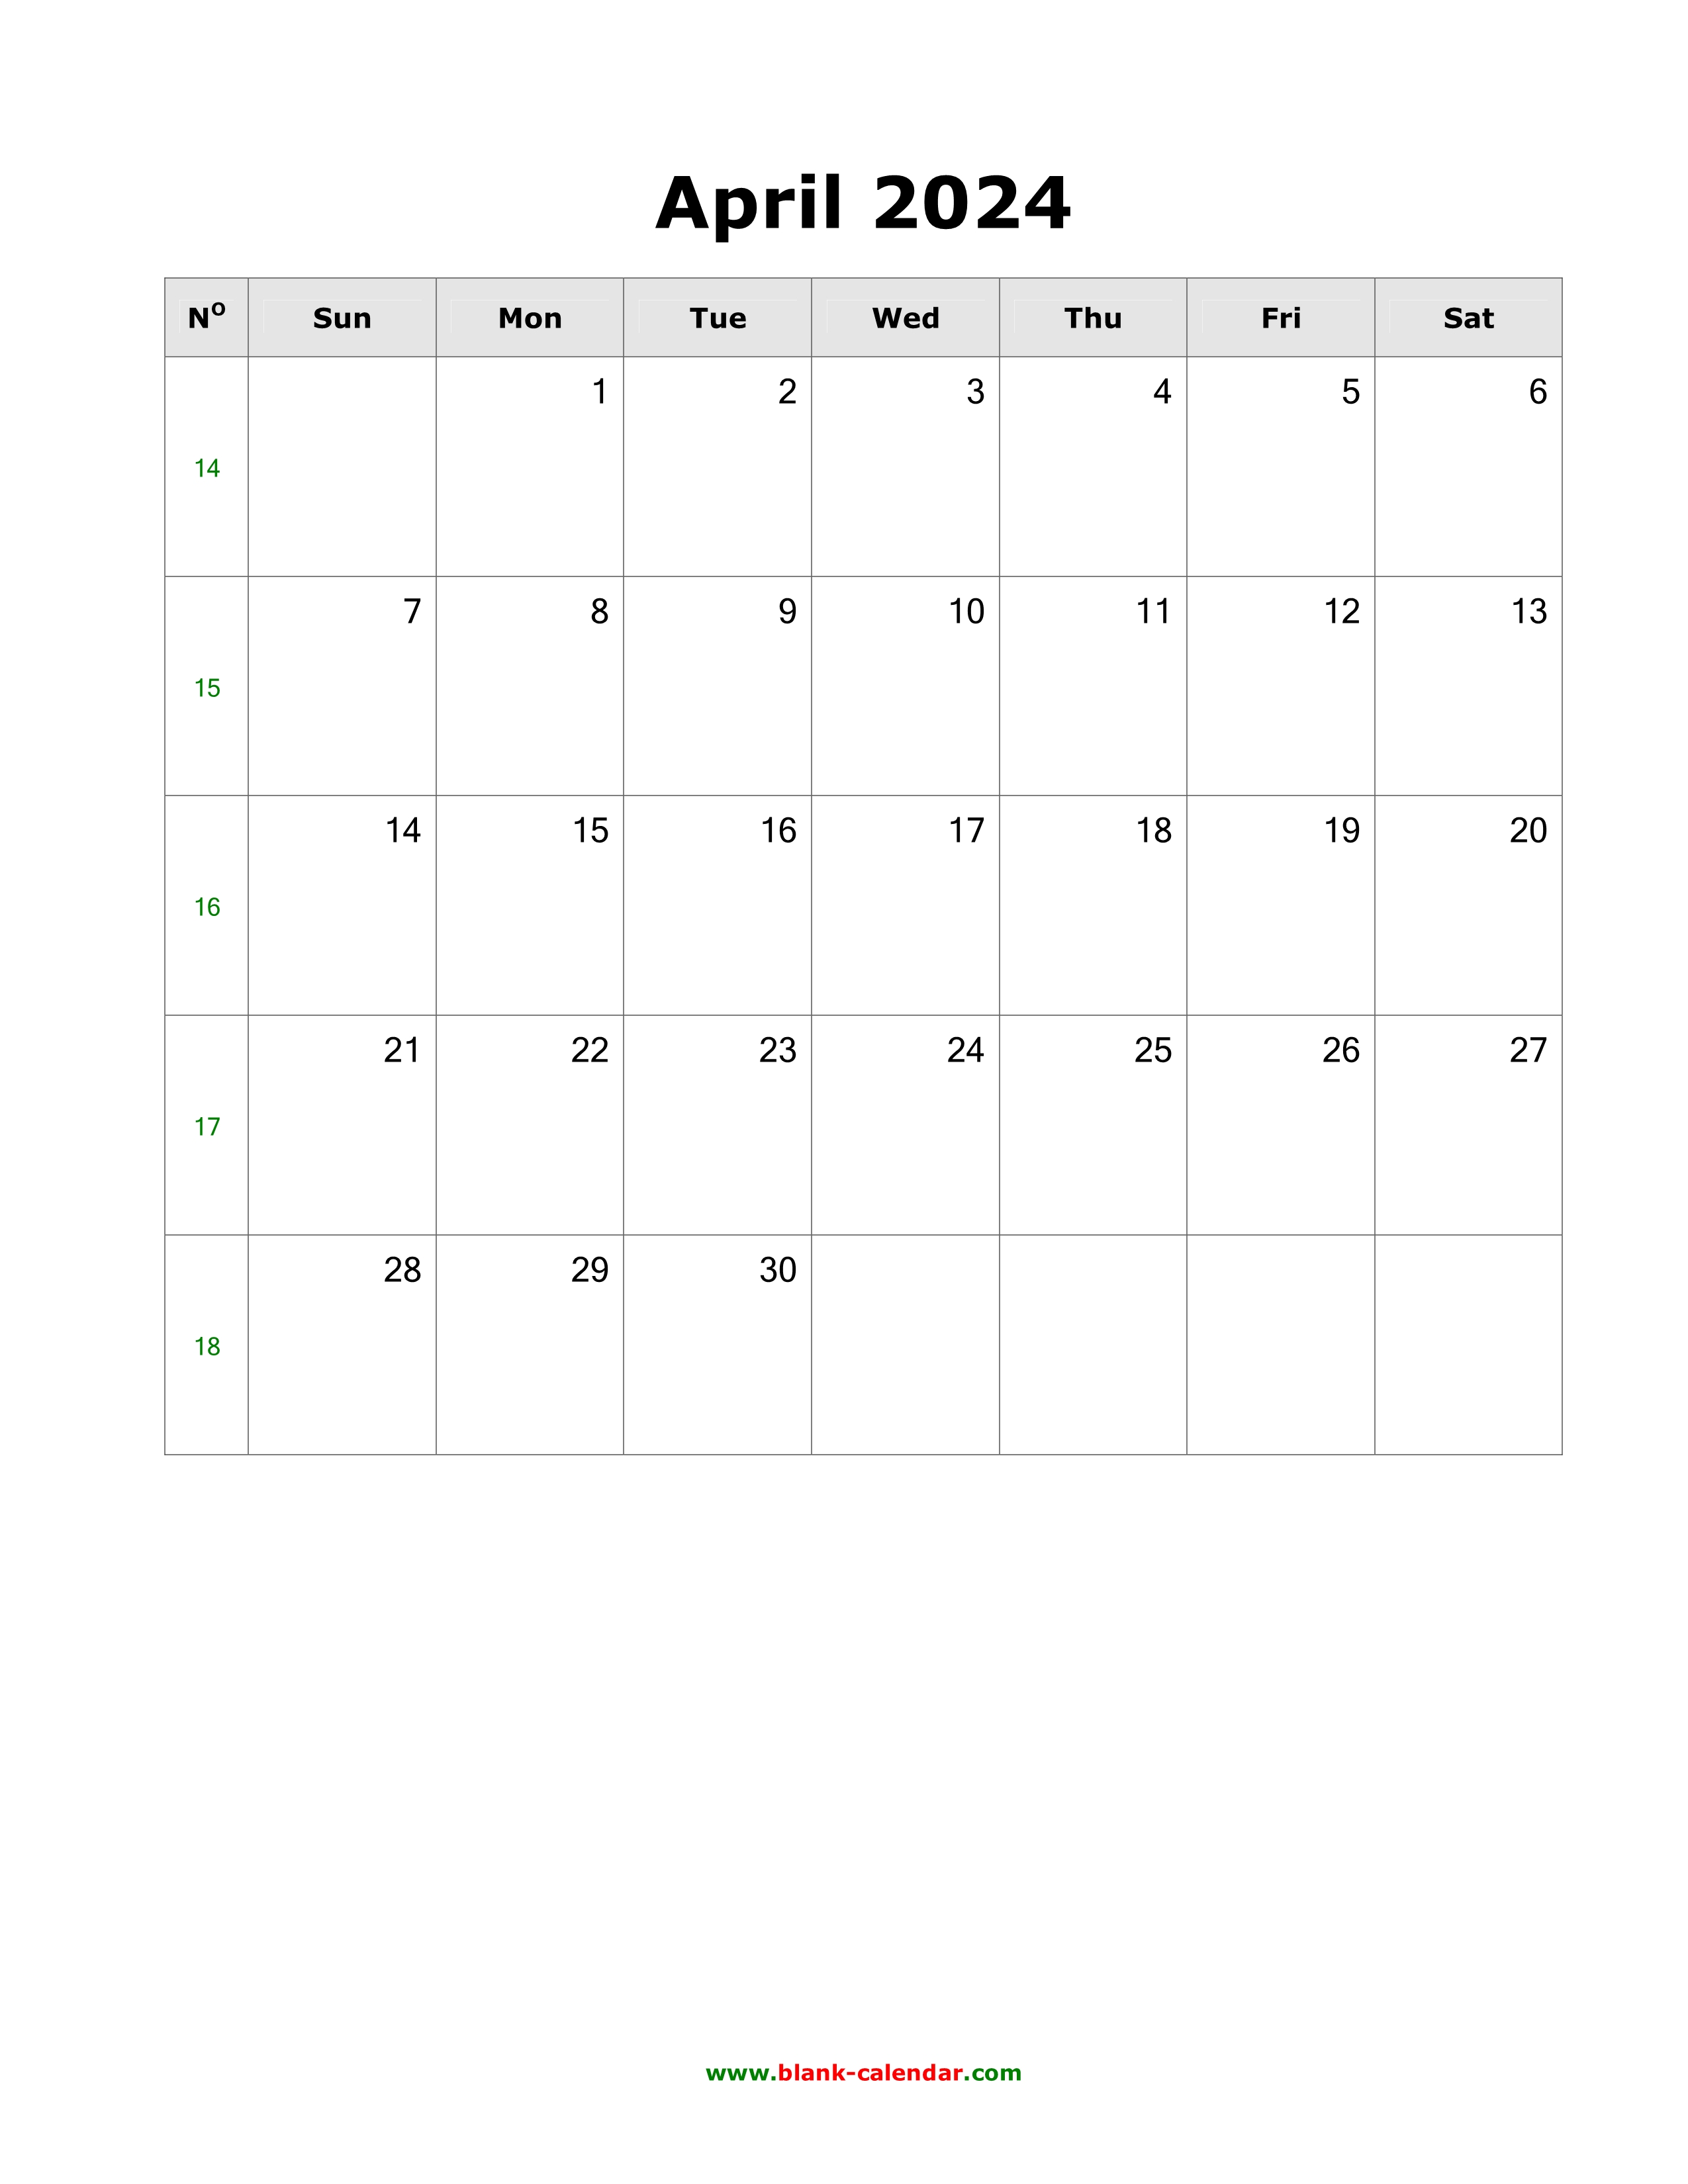 Download April 2024 Blank Calendar with US Holidays (vertical)